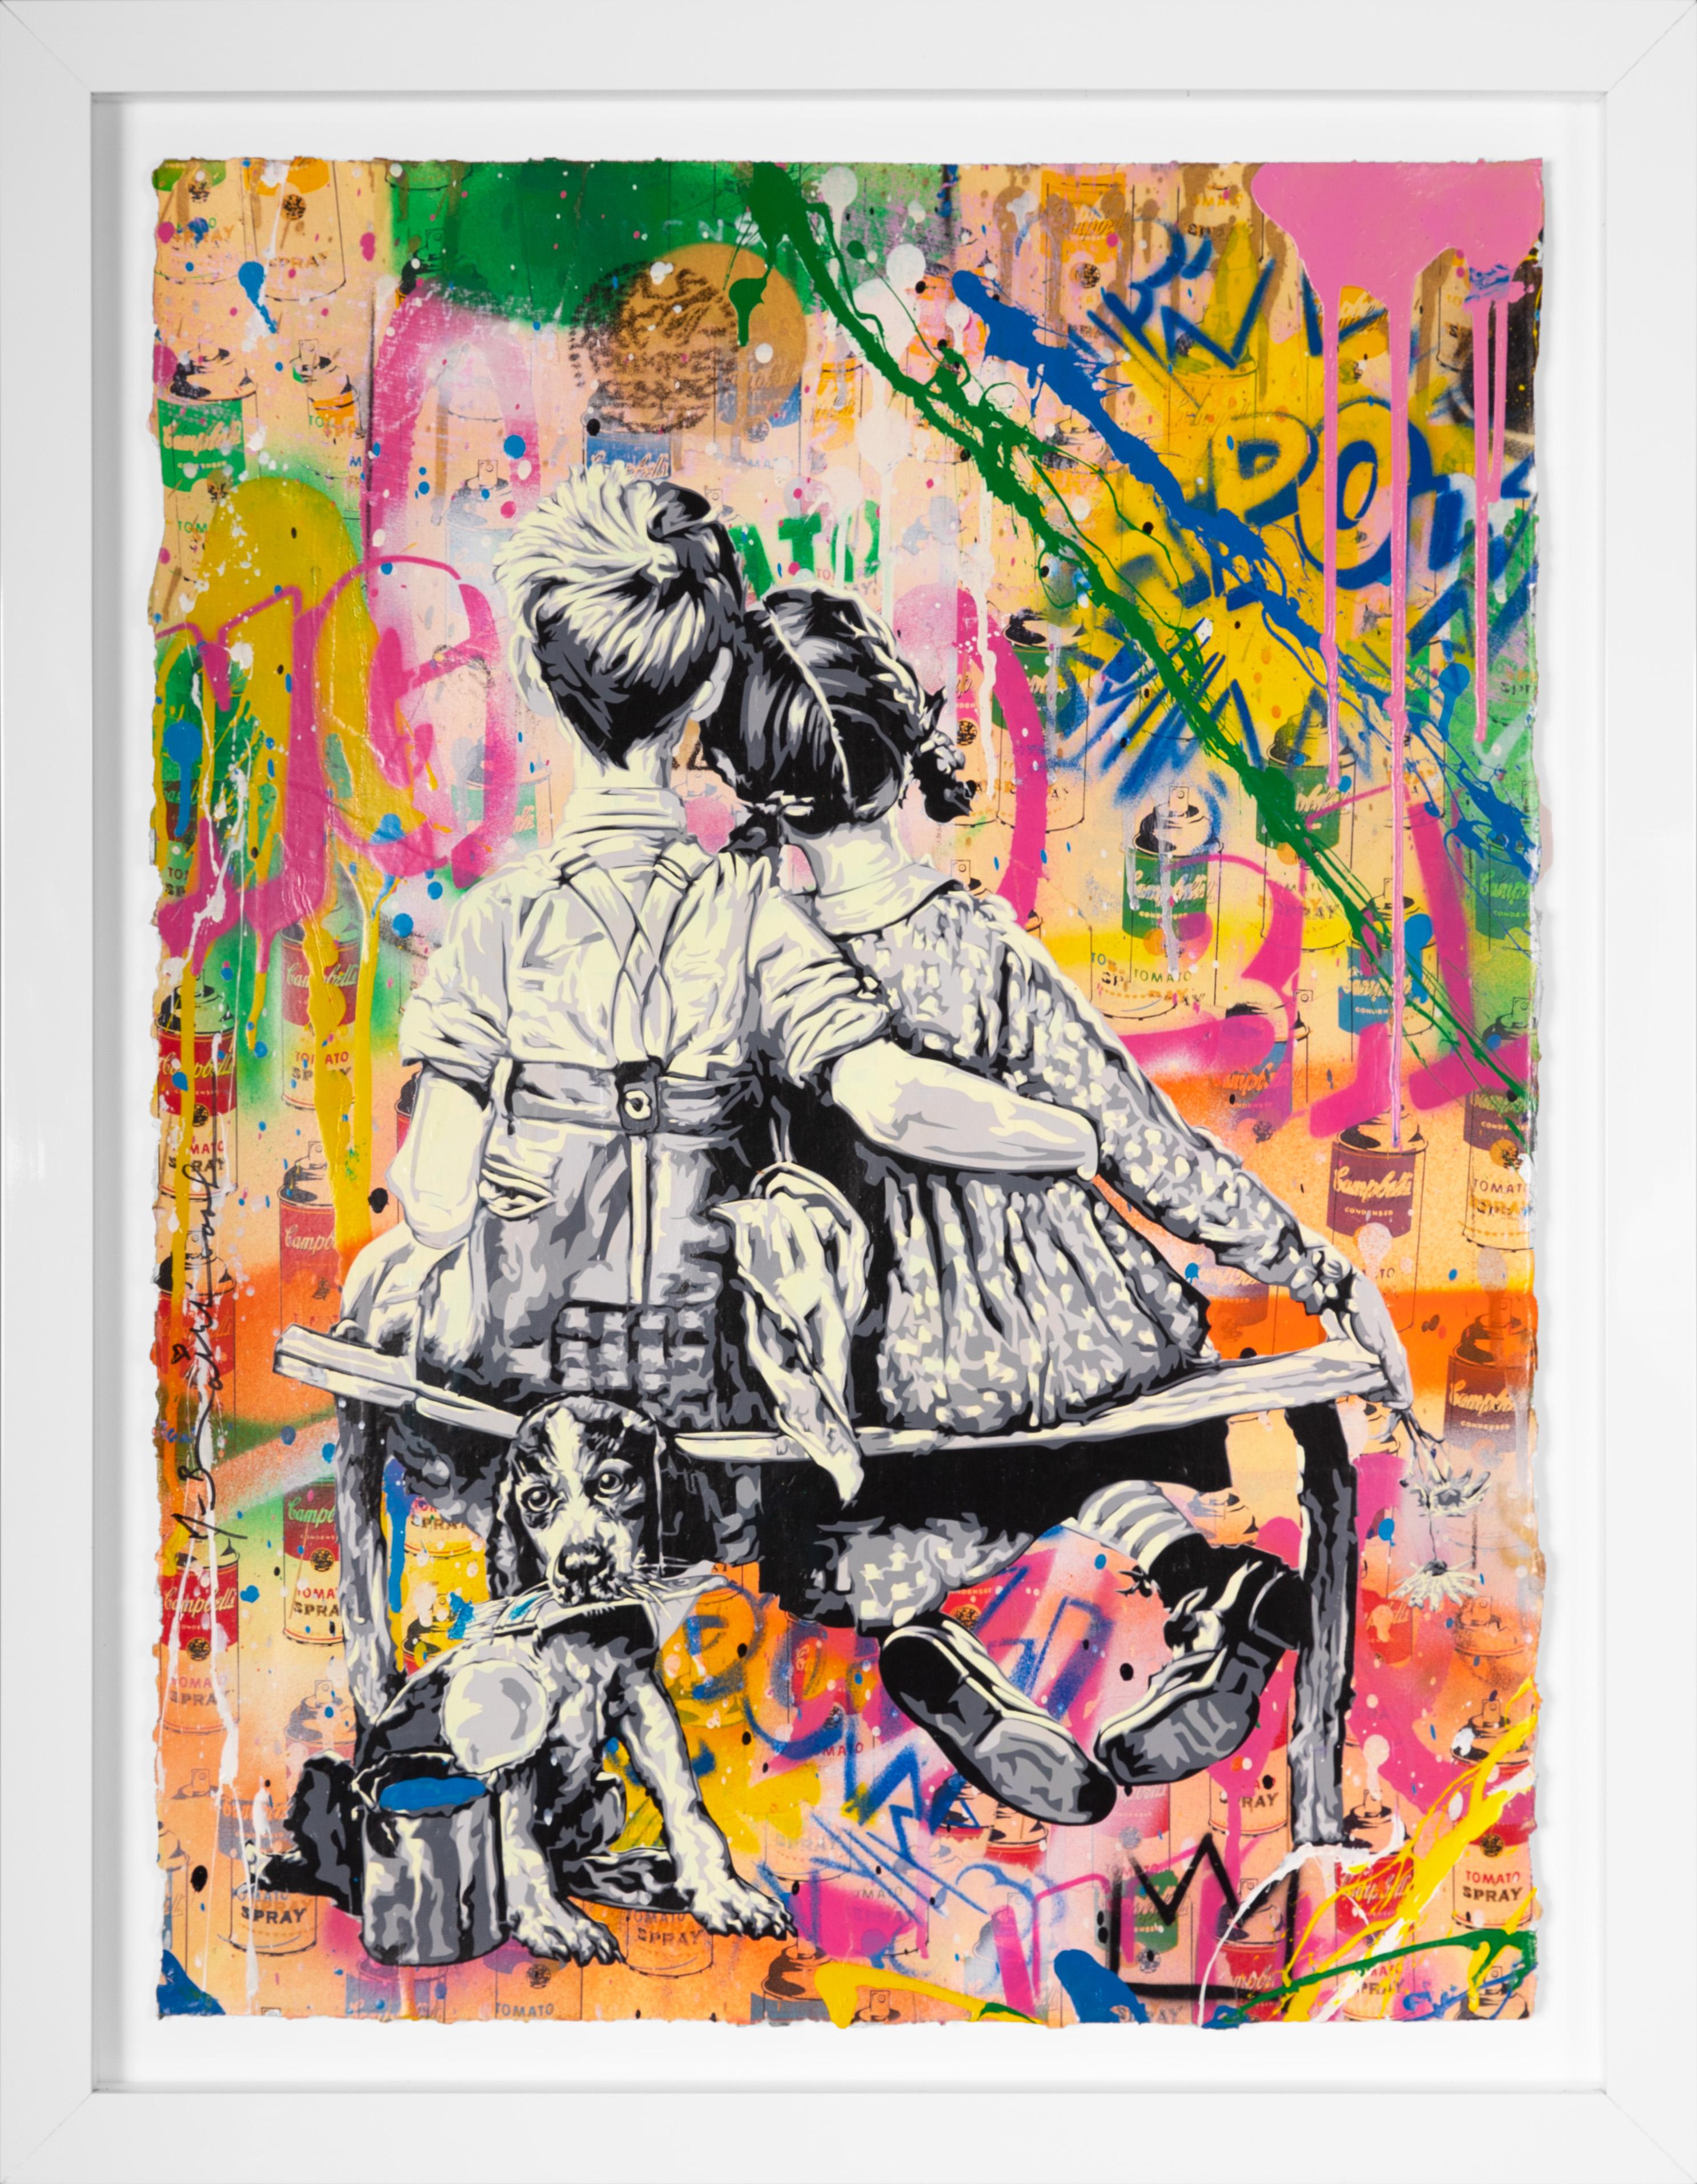 Mr. Brainwash Abstract Painting - 'Work Well Together POW' Unique painting